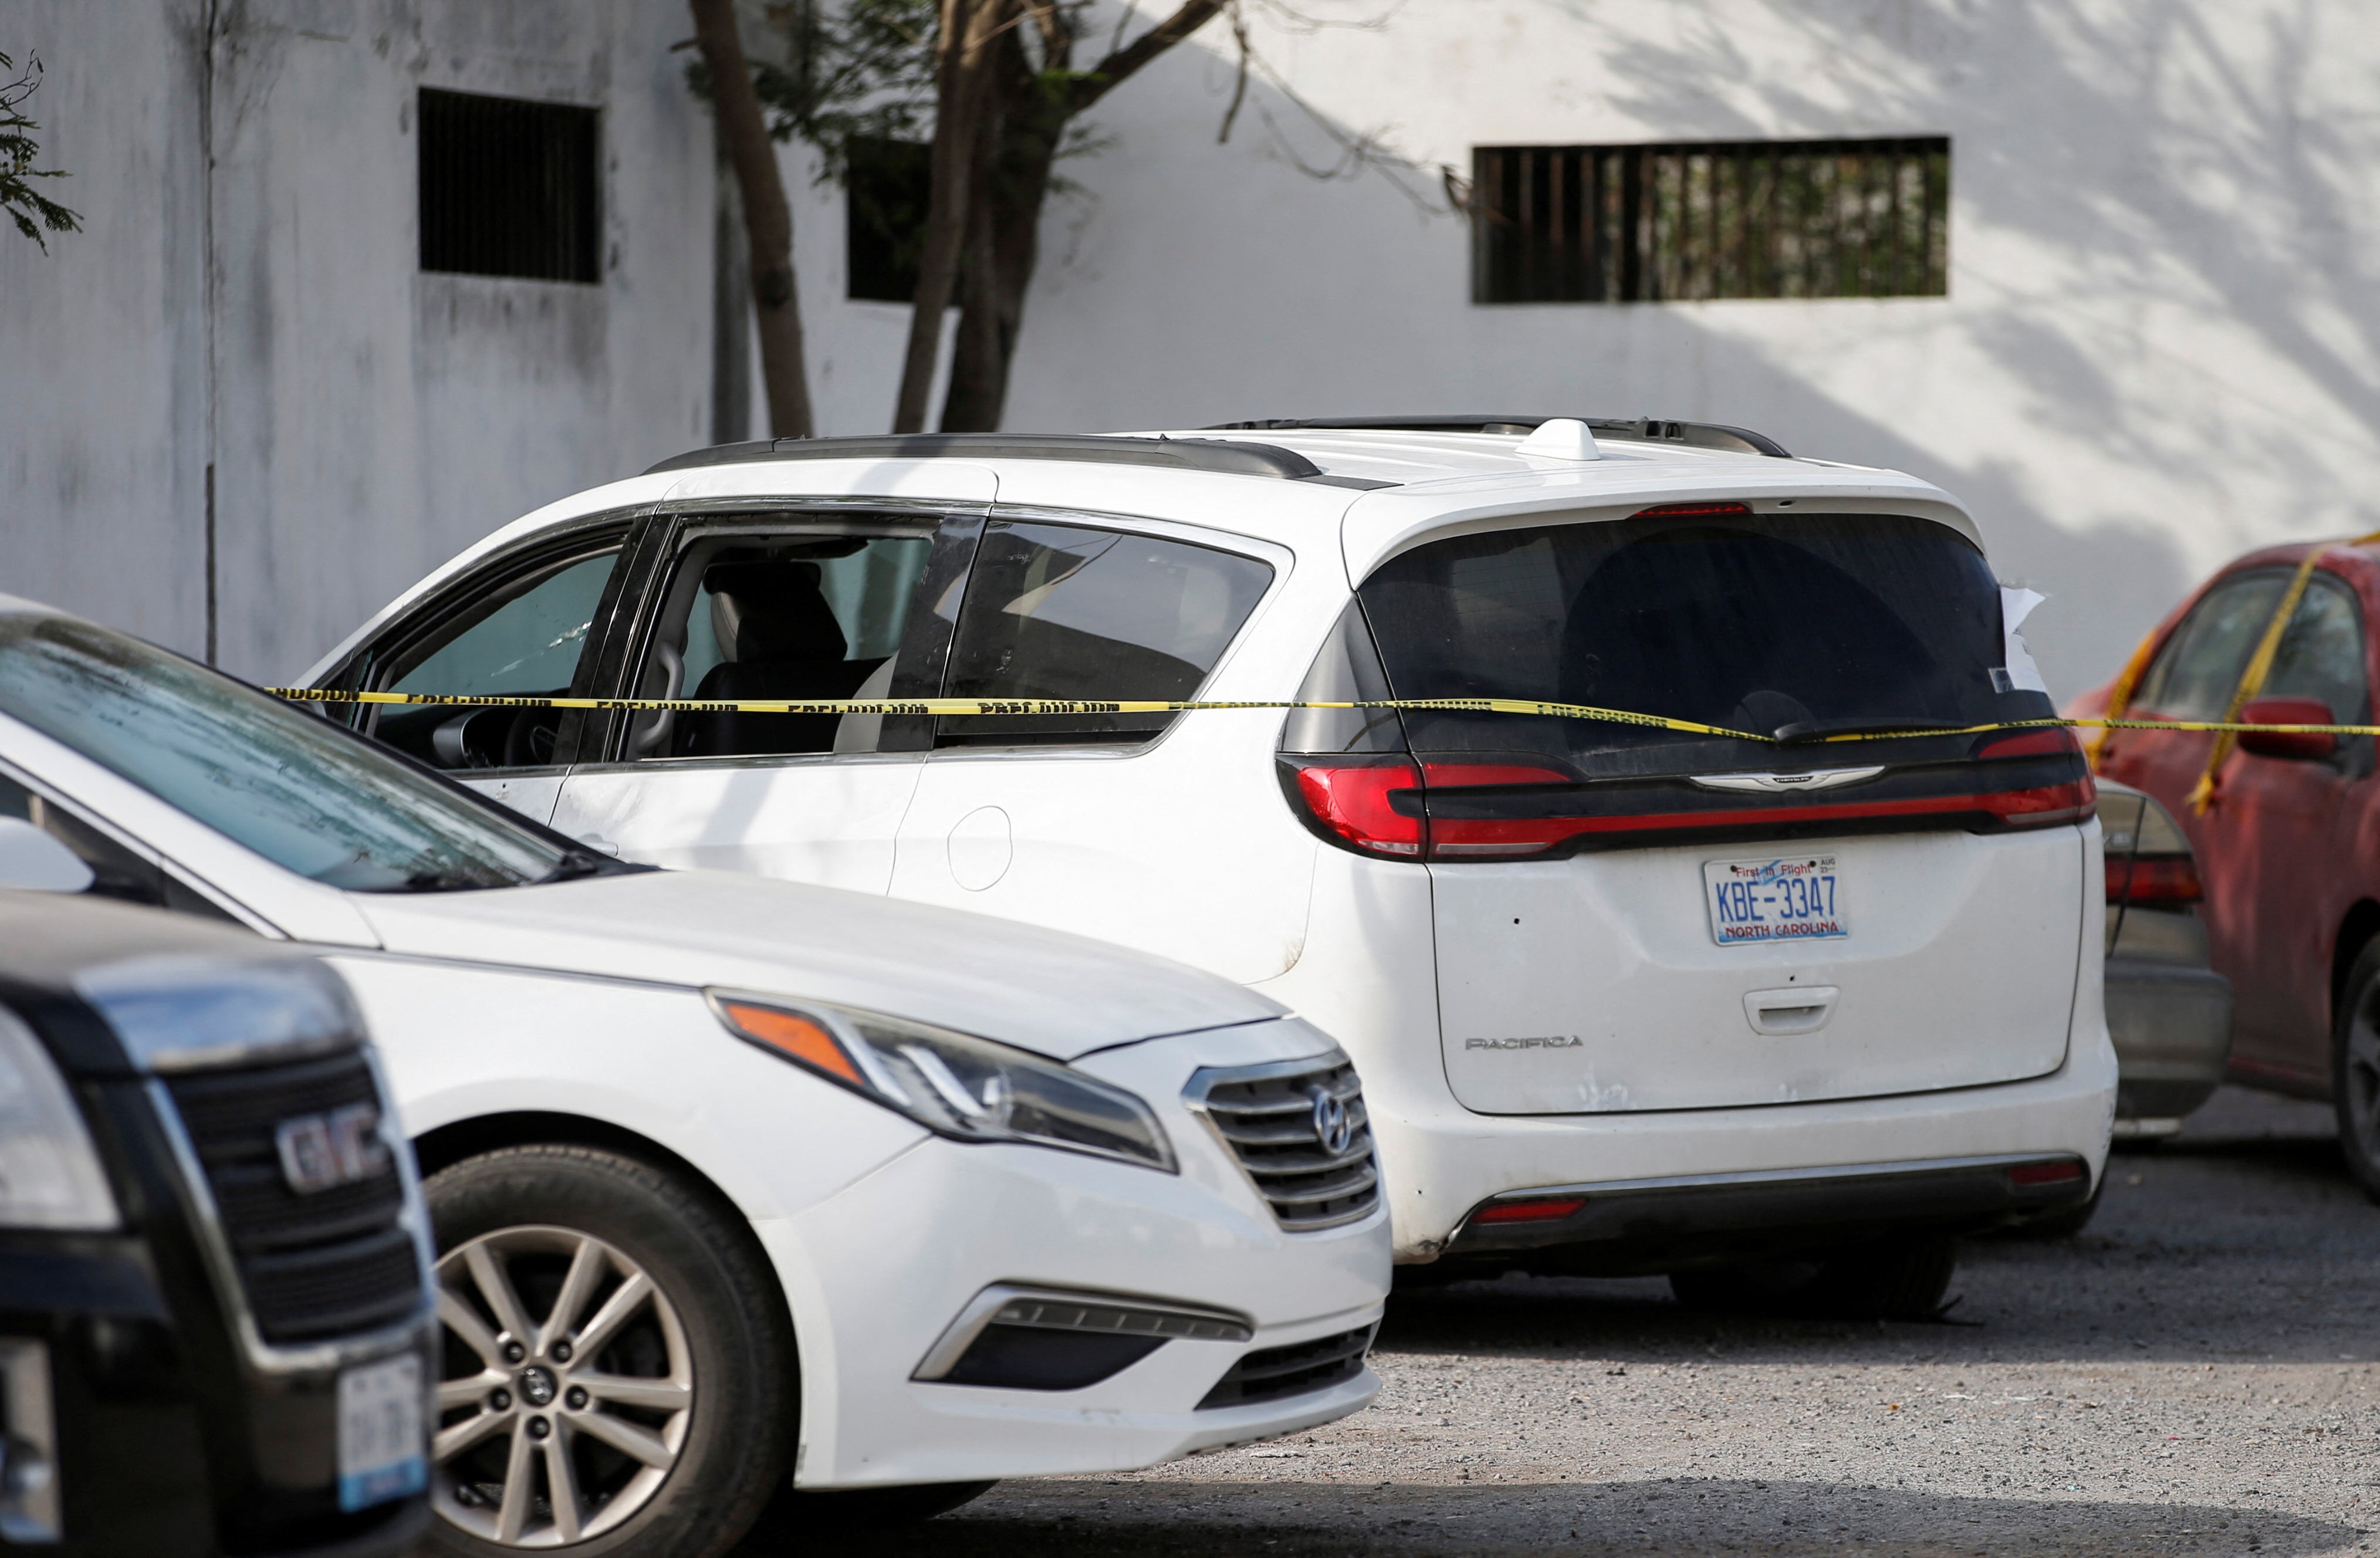 The car in which four Americans were kidnapped by gunman